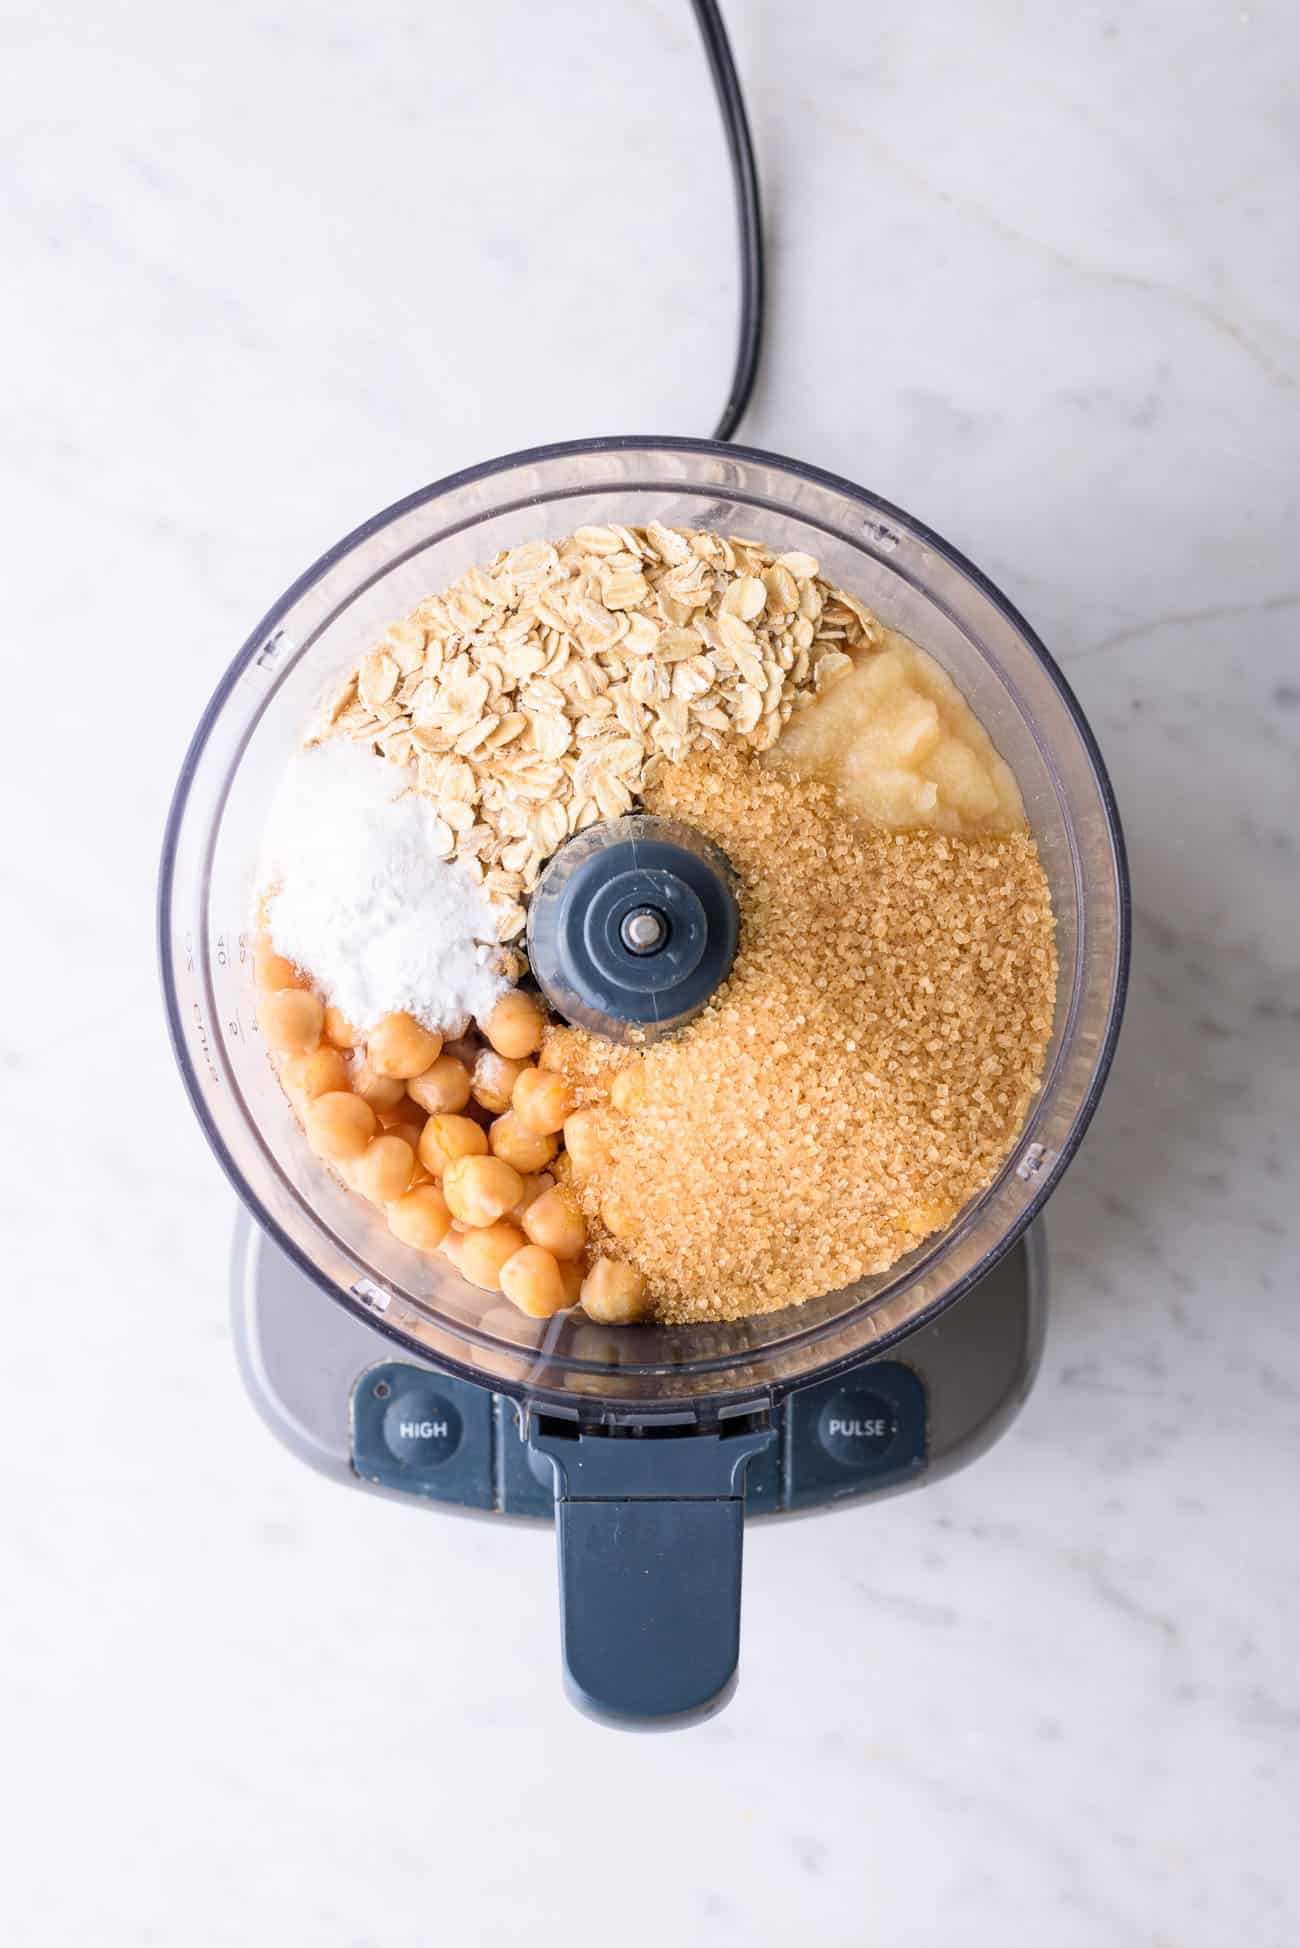 Ingredients to make a vegan chickpea chocolate chip cookie cake in a food processor